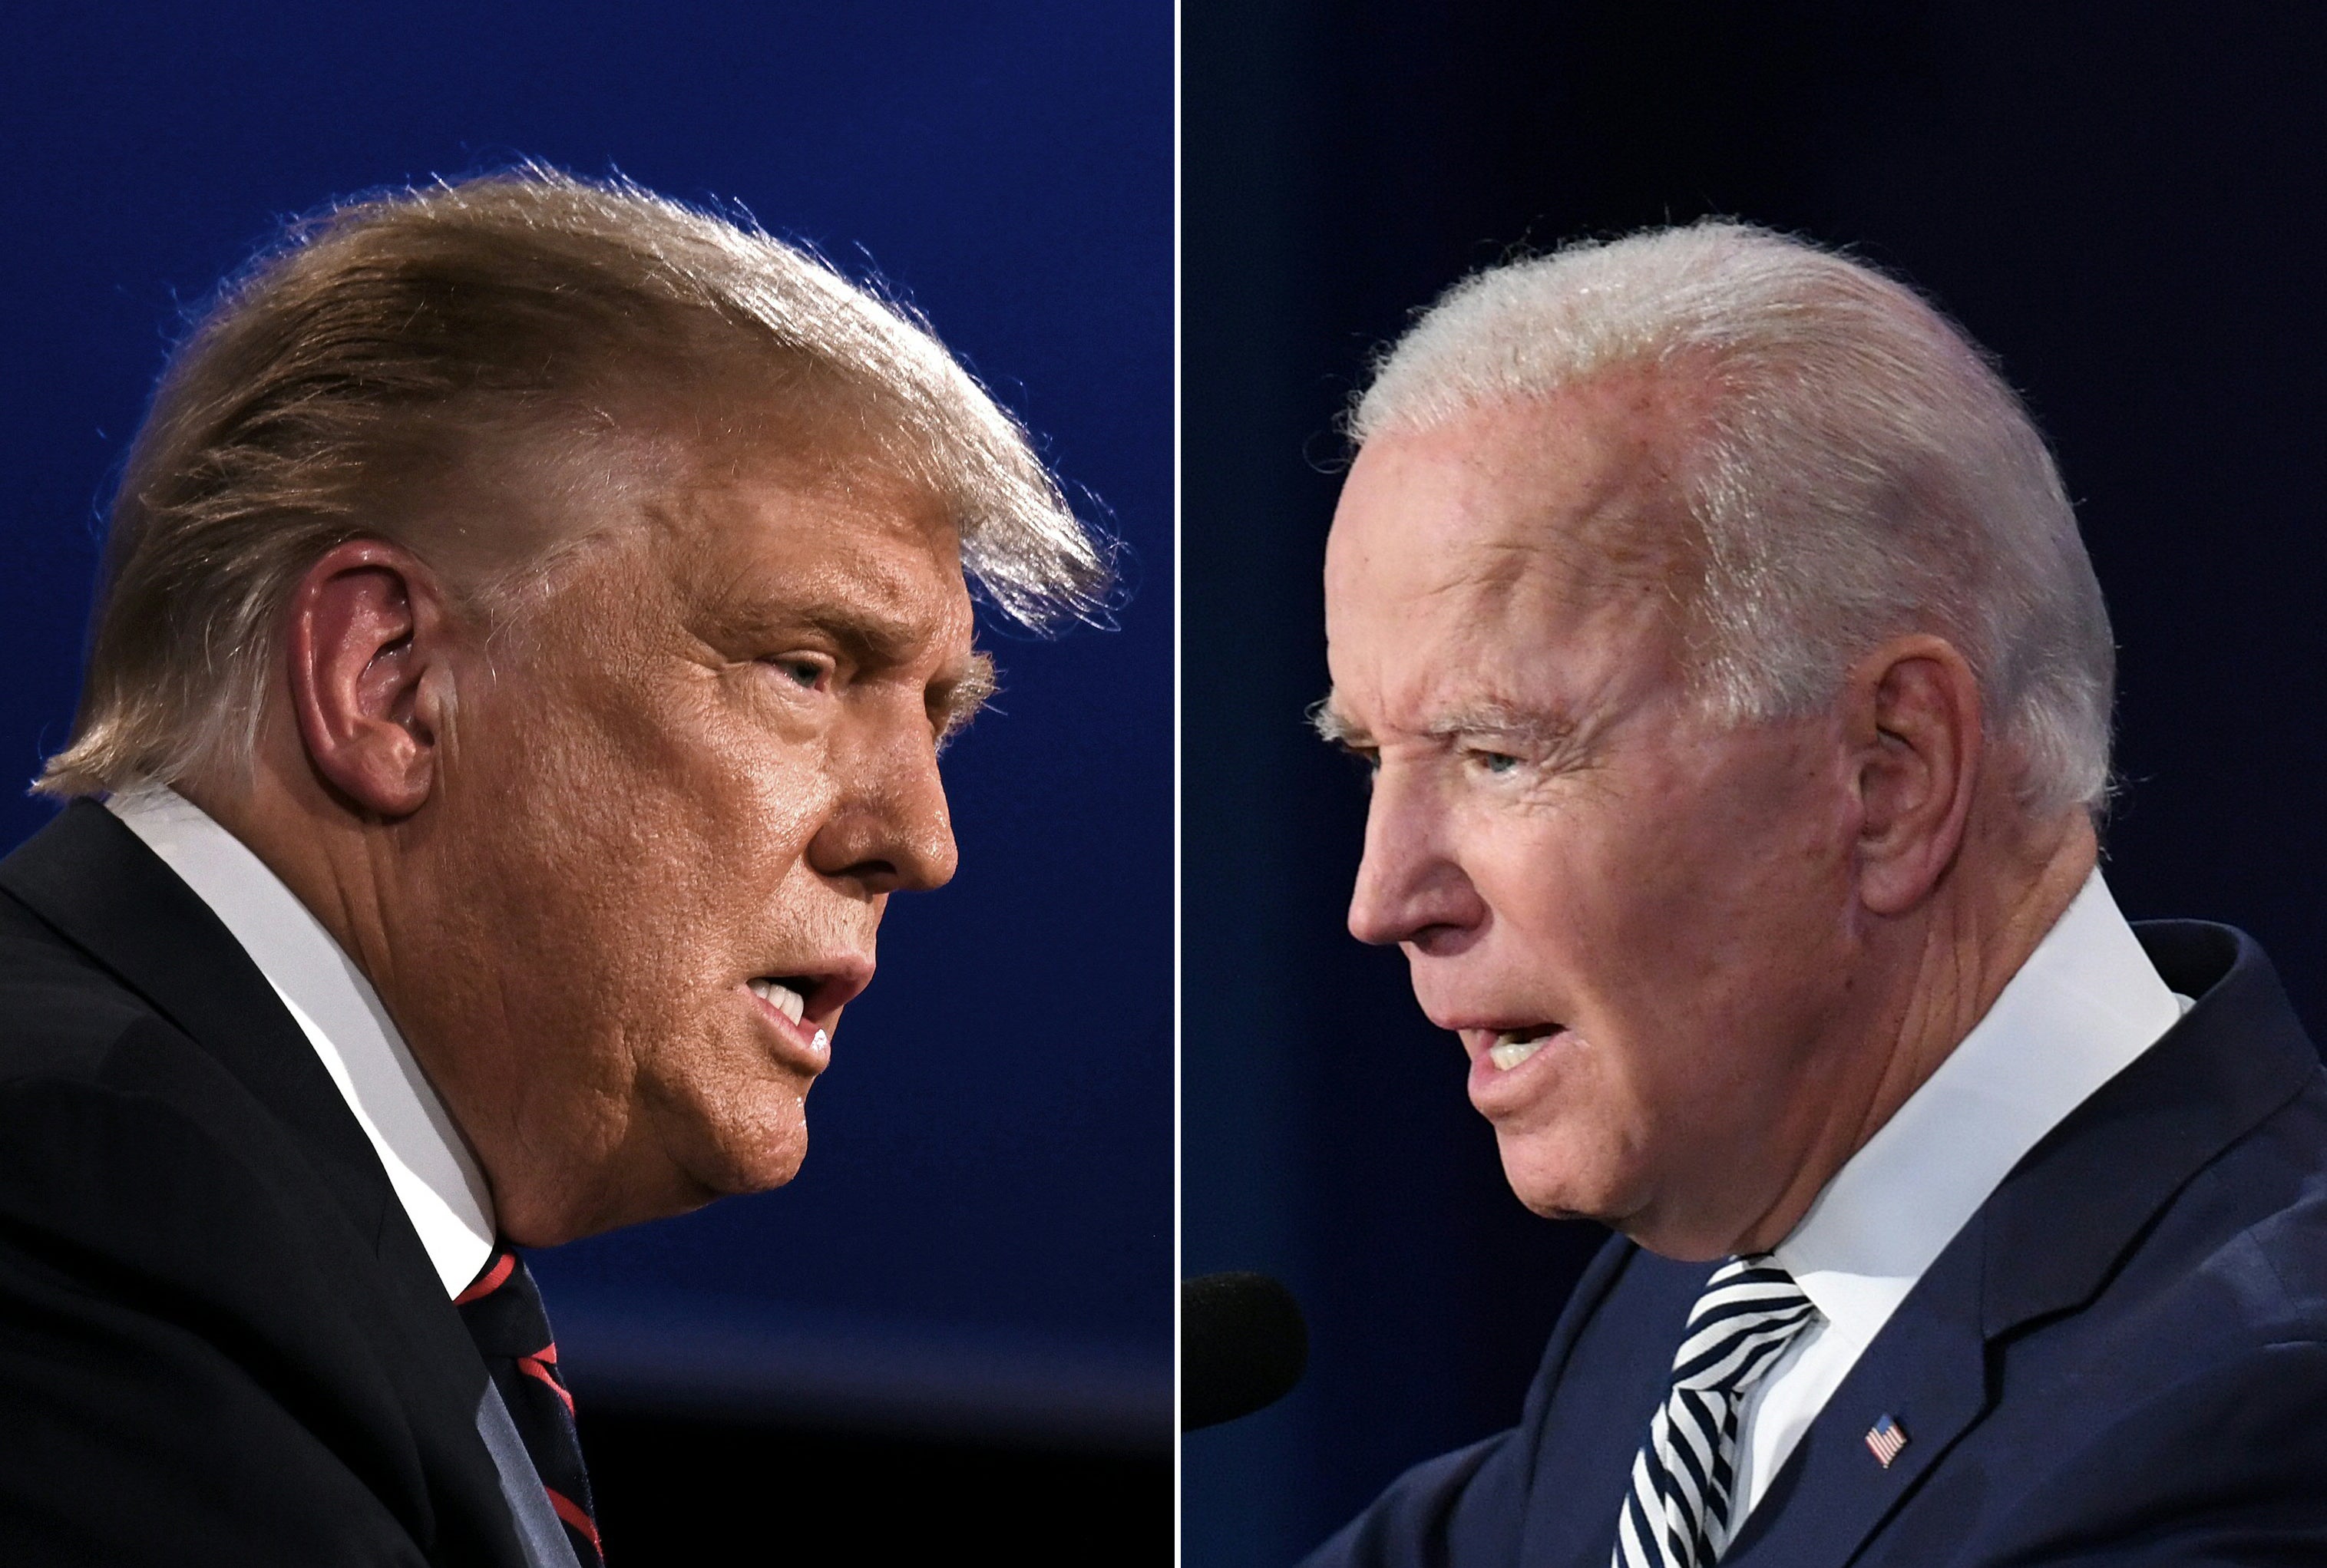 US President Donald Trump (L) and Democratic Presidential candidate former Vice President Joe Biden squaring off at first presidential debate in Cleveland, Ohio on September 29, 2020.